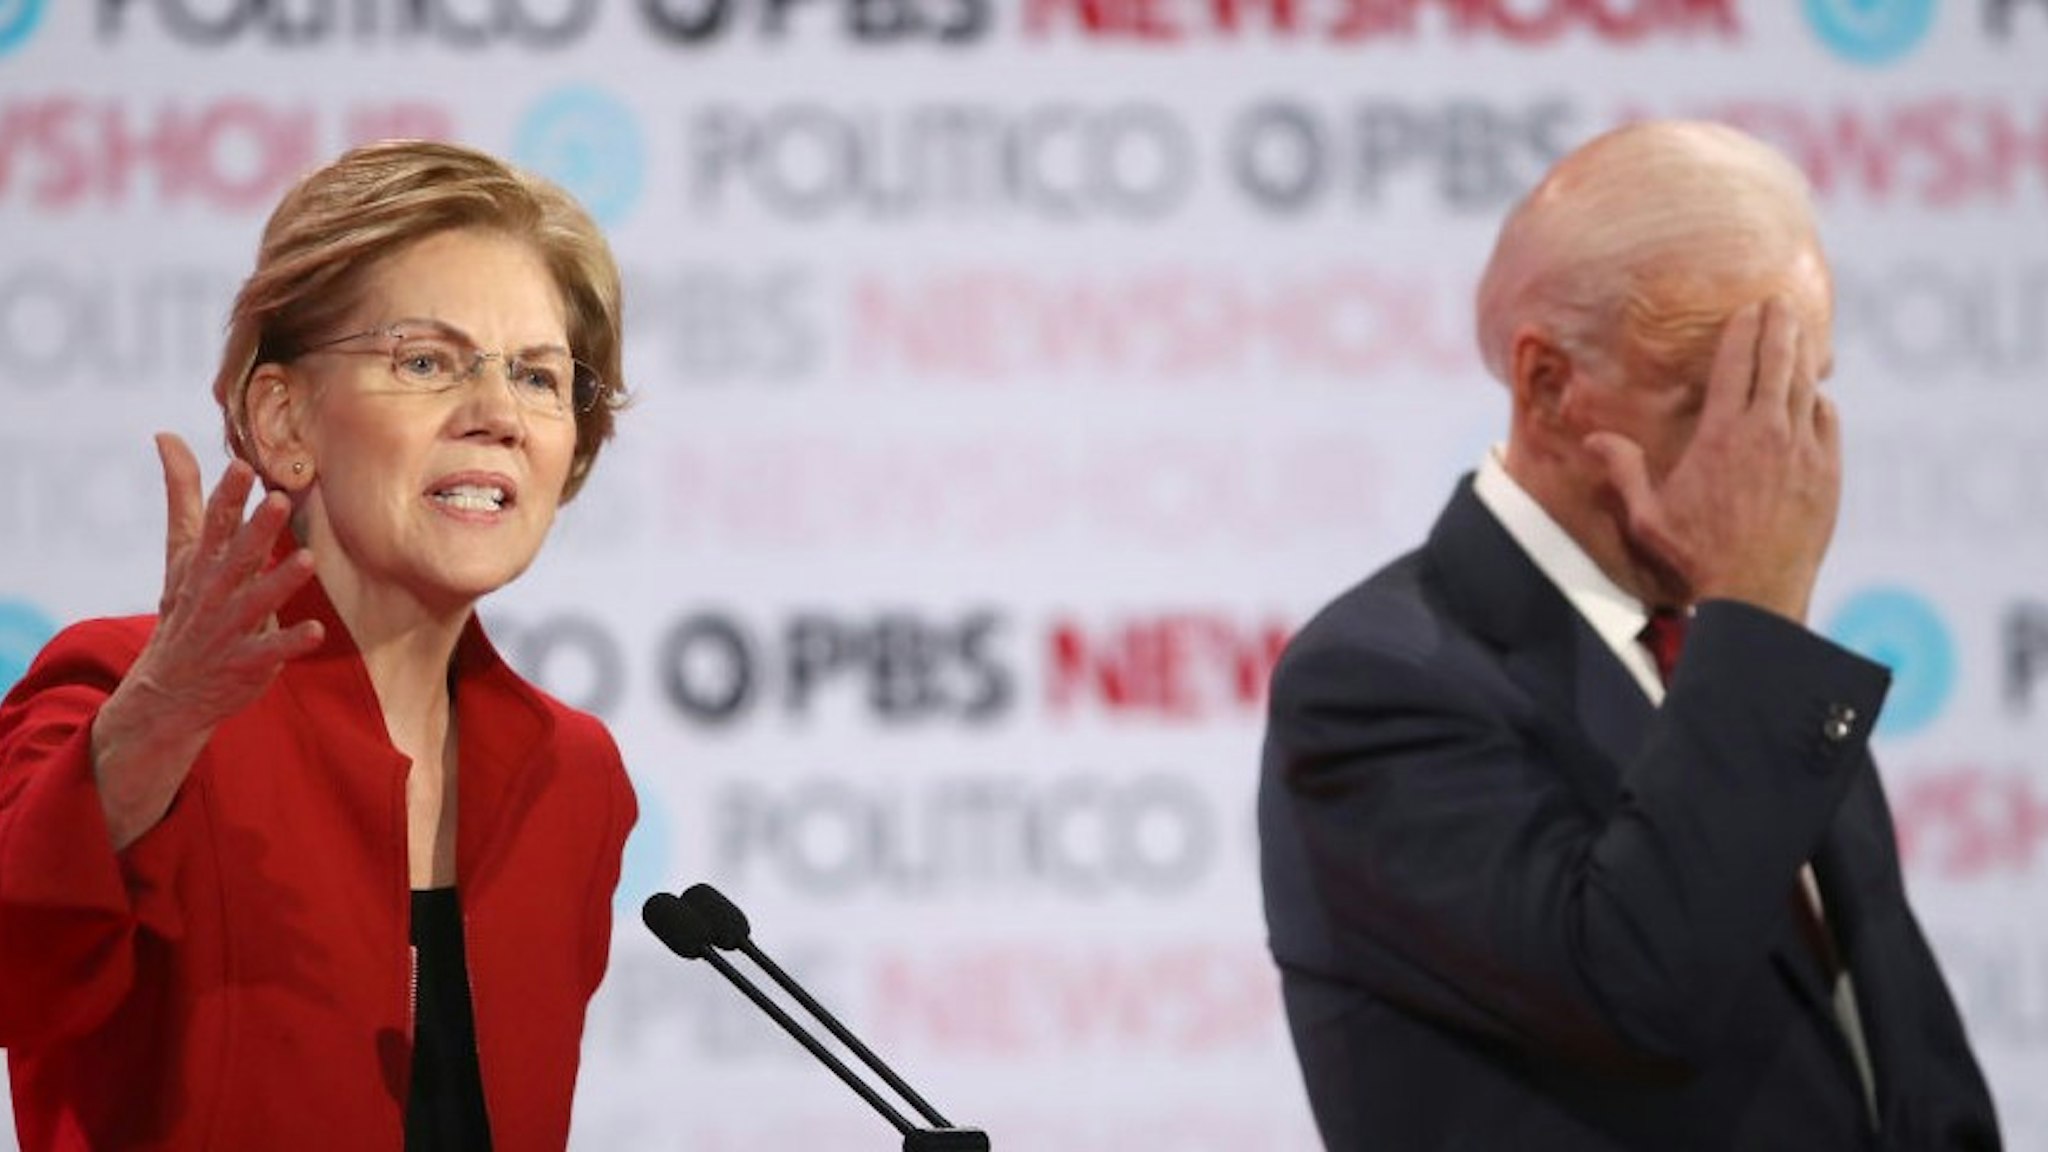 LOS ANGELES, CALIFORNIA - DECEMBER 19: Sen. Elizabeth Warren (D-MA) speaks as former Vice President Joe Biden listens during the Democratic presidential primary debate at Loyola Marymount University on December 19, 2019 in Los Angeles, California. Seven candidates out of the crowded field qualified for the 6th and last Democratic presidential primary debate of 2019 hosted by PBS NewsHour and Politico. (Photo by